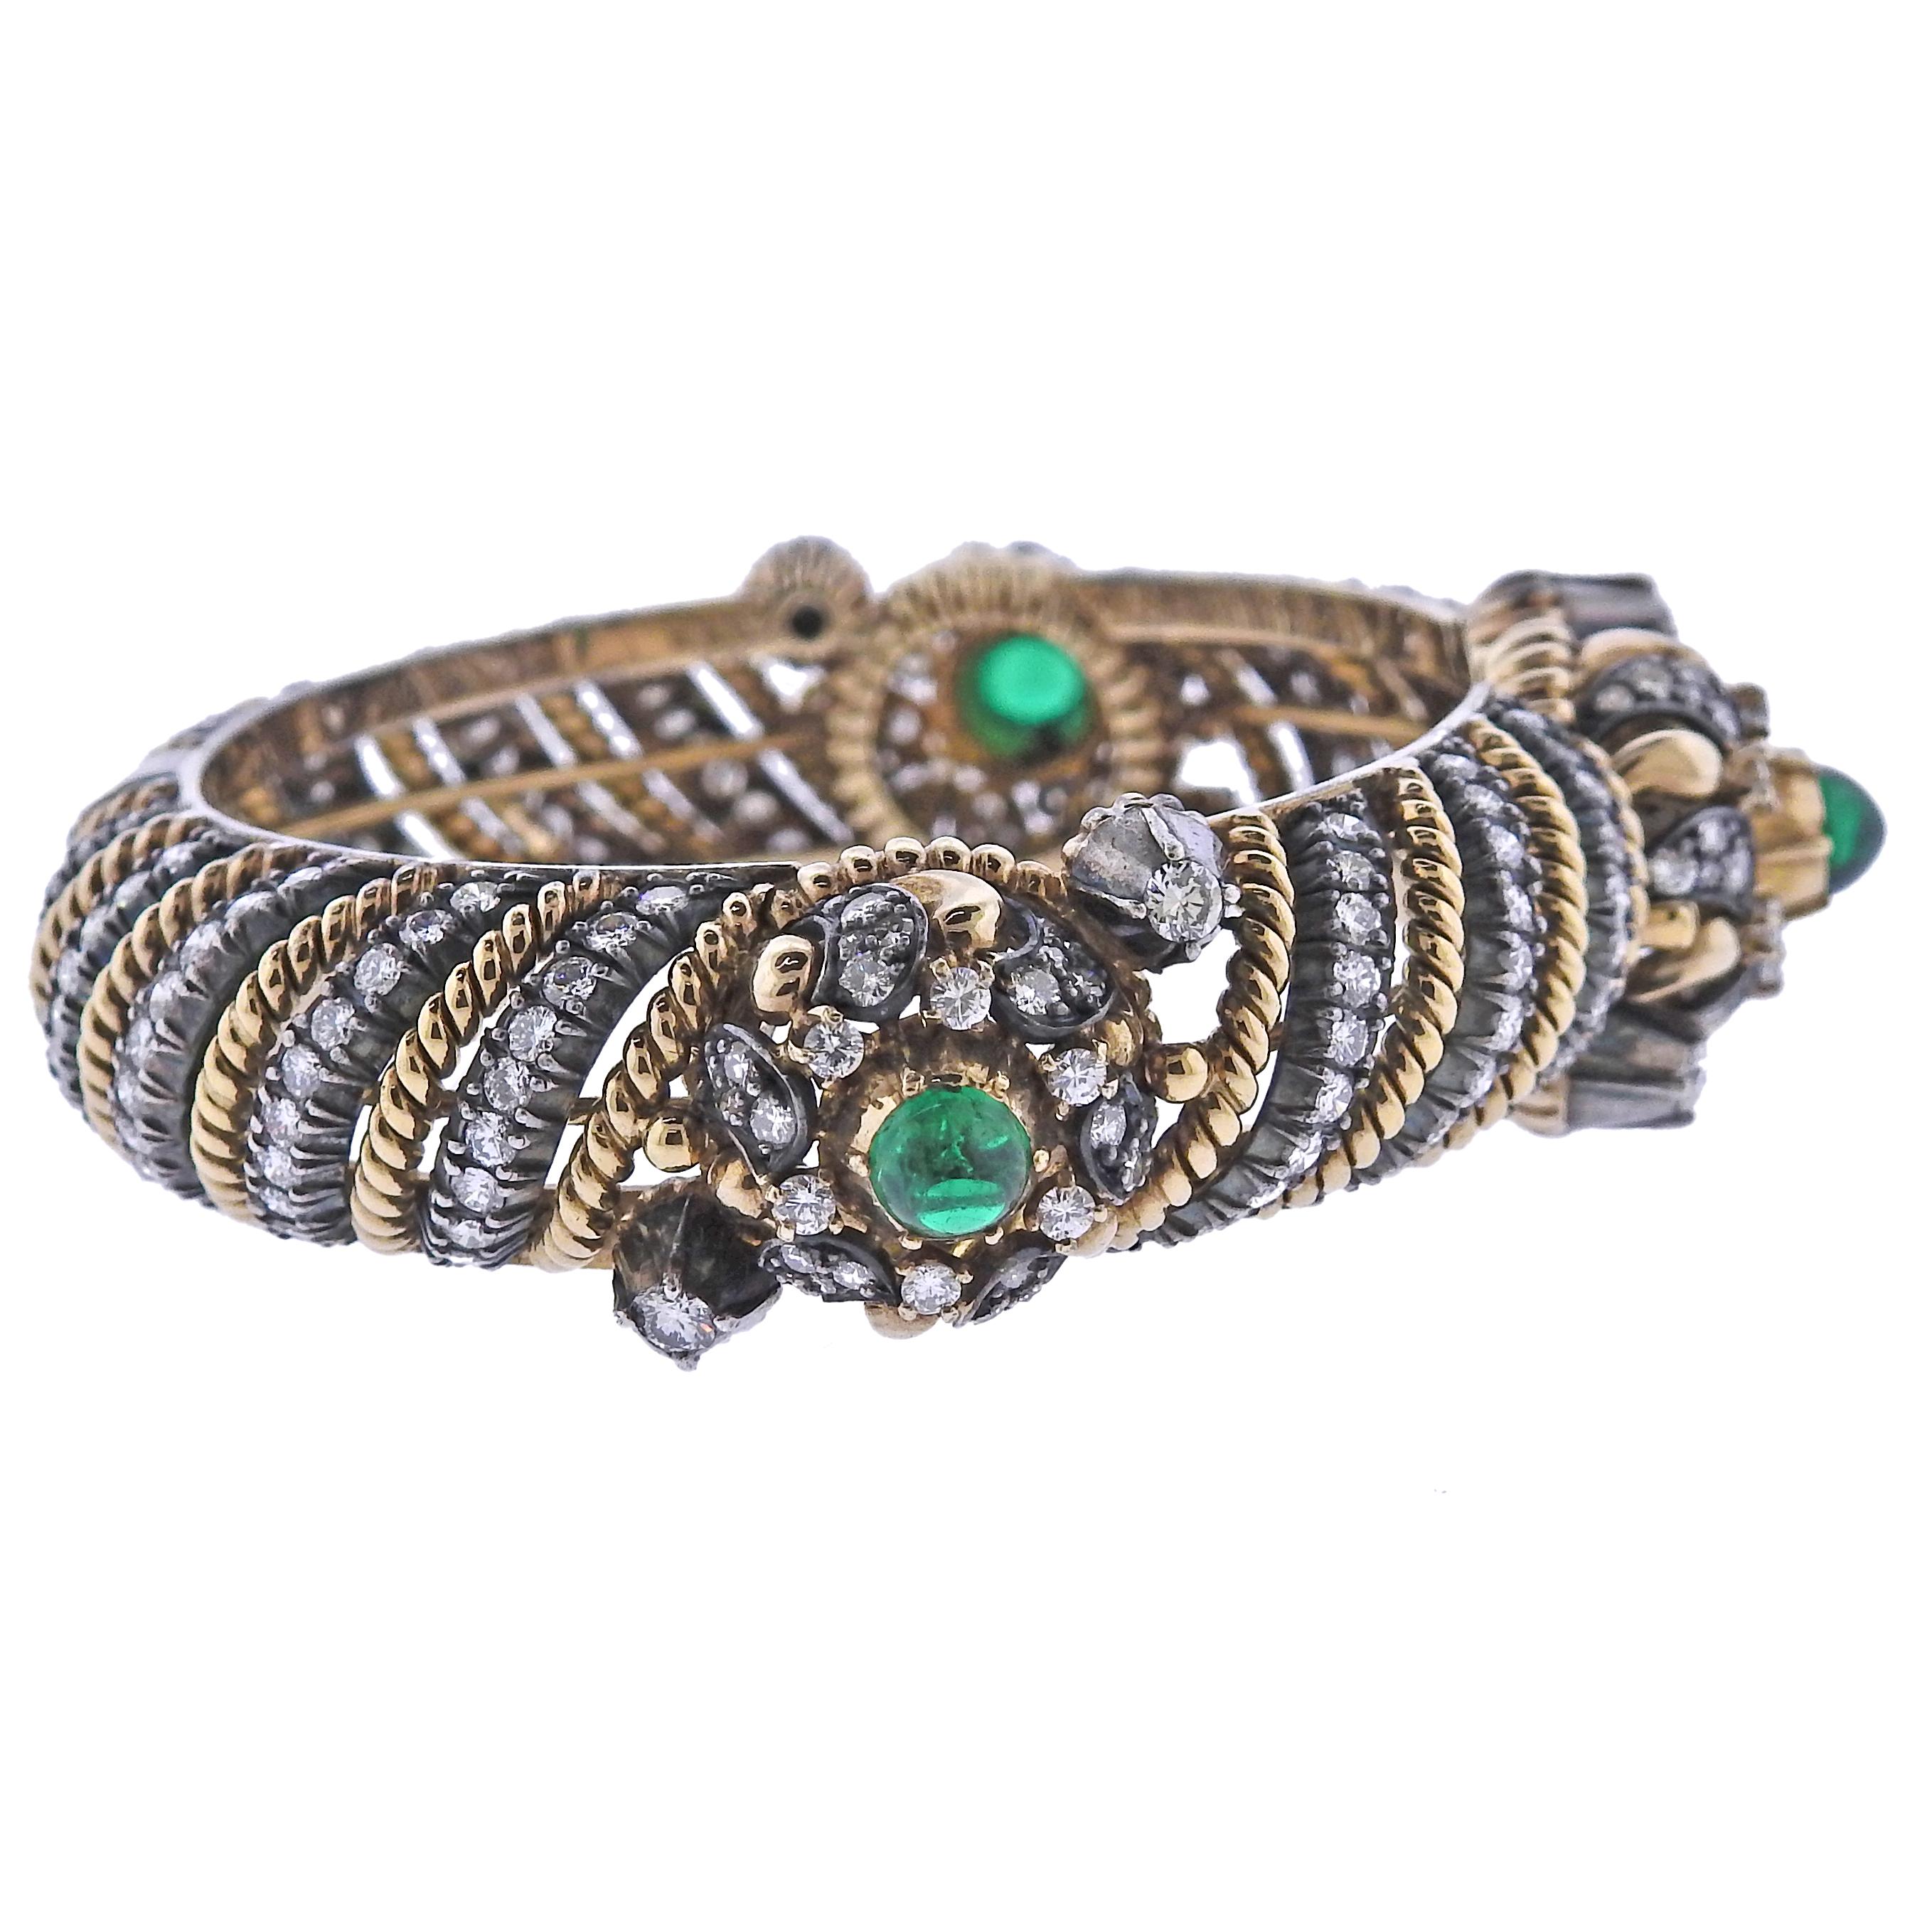 18k Gold and silver fine bracelet with 3 emerald cabochons and approx. 6.00ctw diamonds. Bracelet will fit up to 7